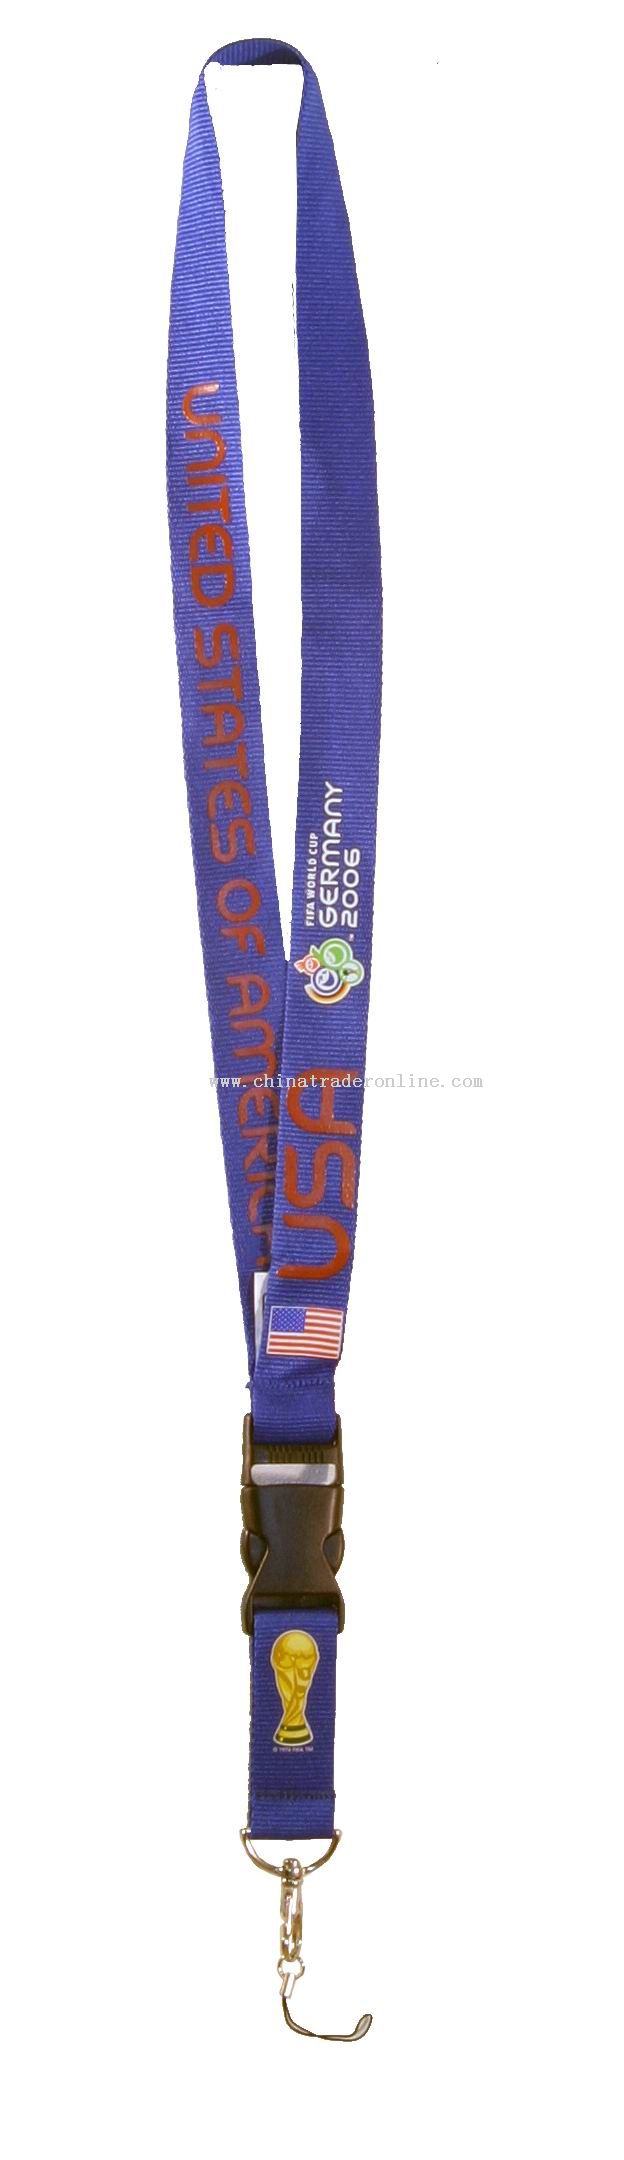 2010 World Cup Lanyard from China